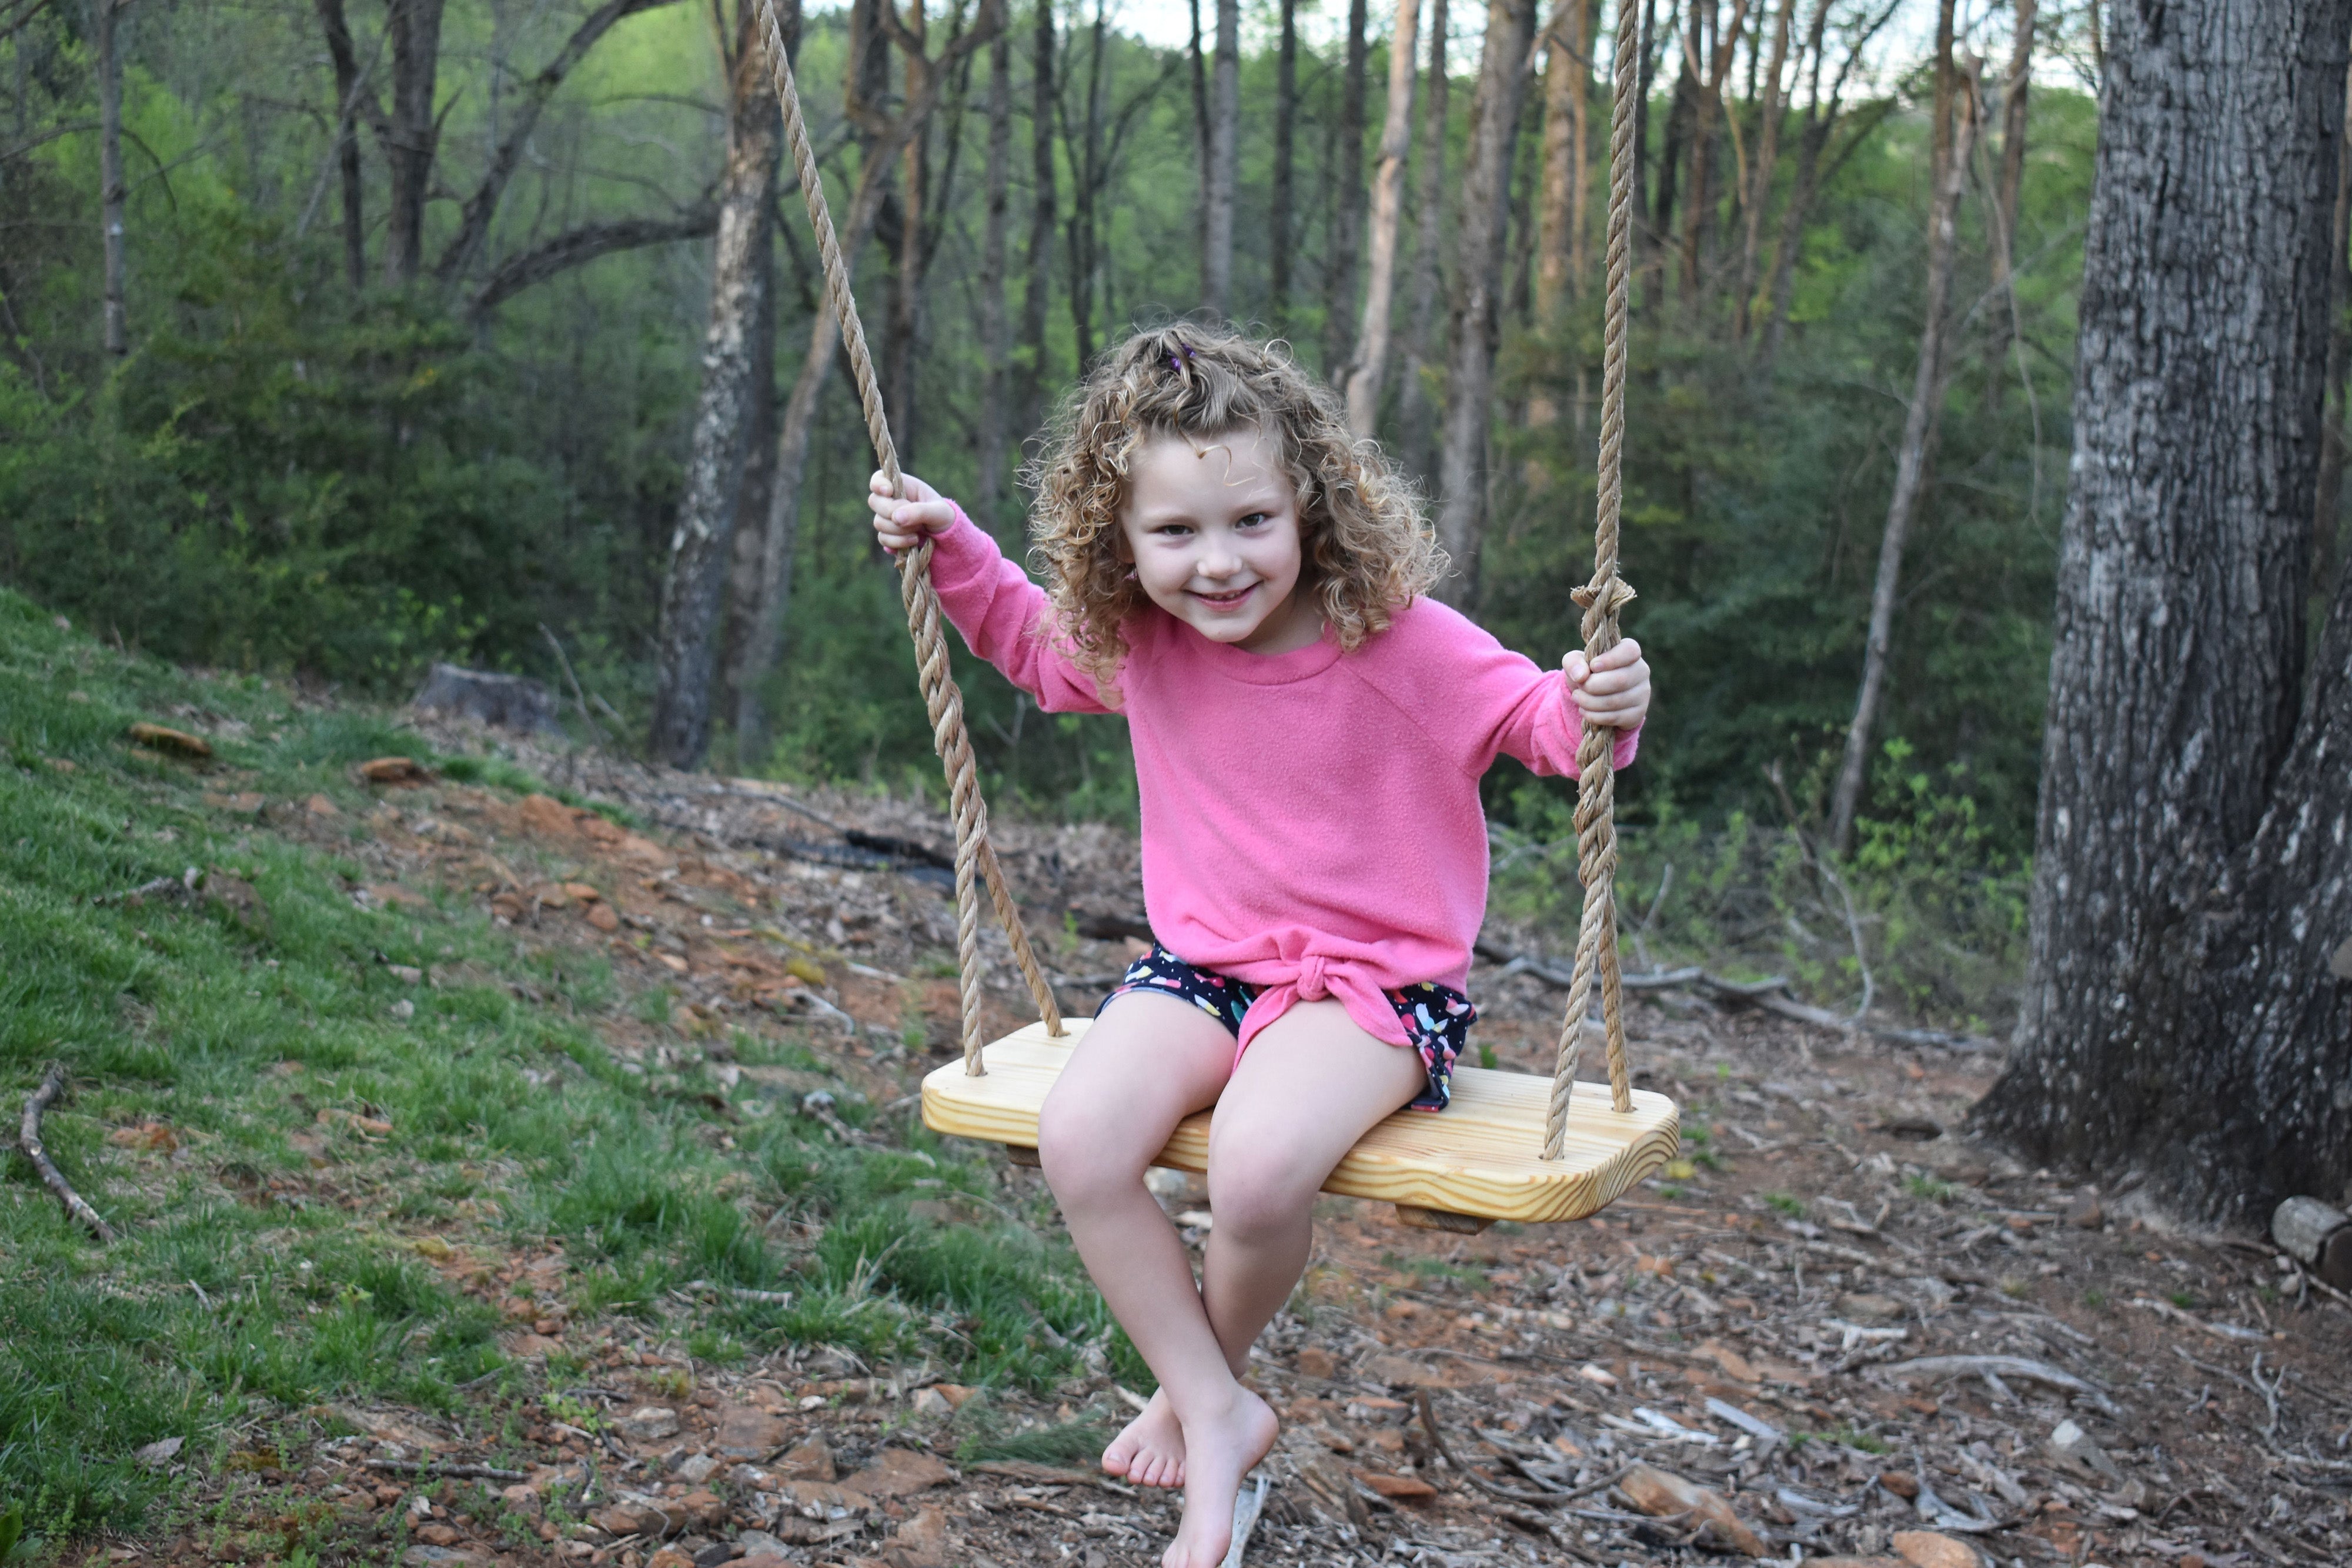 Premier Wood Tree Swing Kit for Adults or Children Easy to Hang